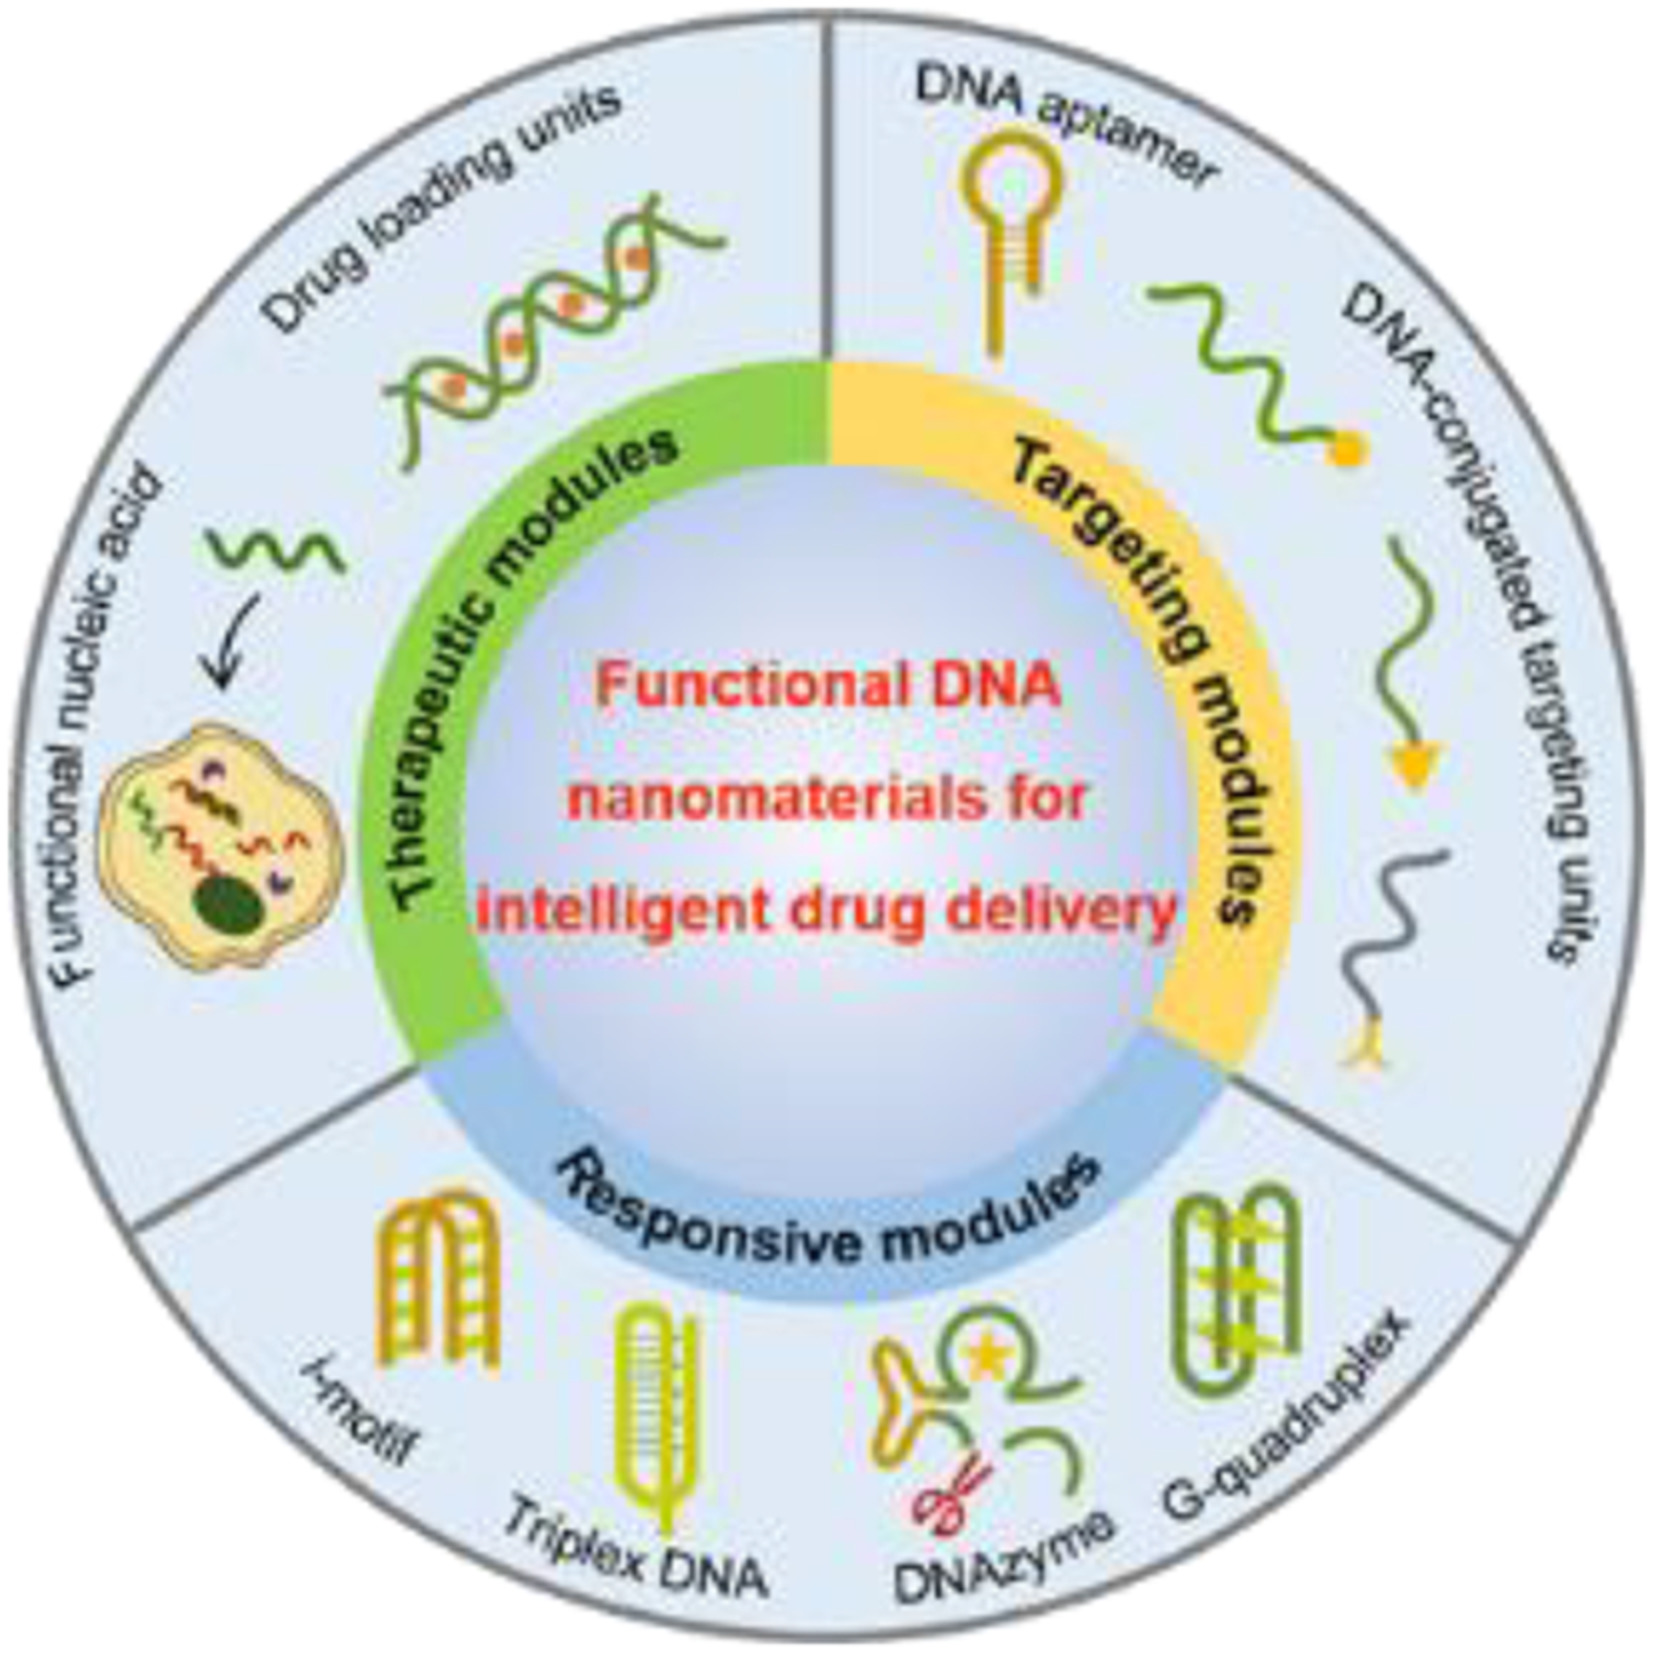 Multimodules integrated functional DNA nanomaterials for intelligent drug delivery